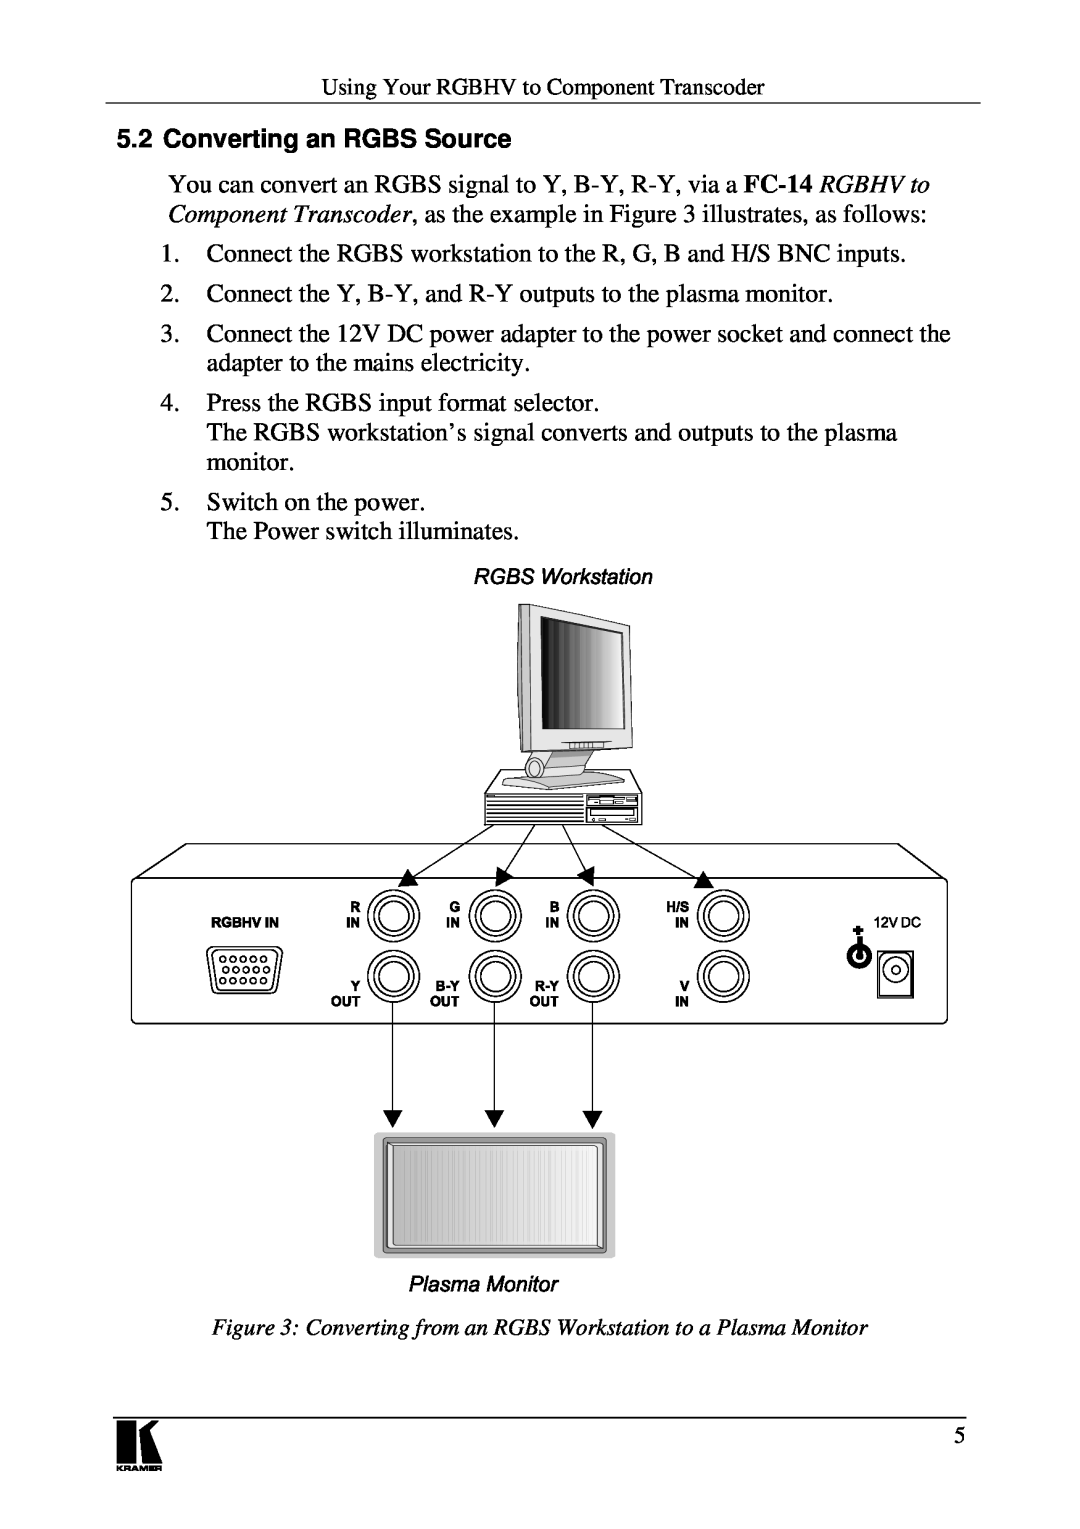 Kramer Electronics FC-14 user manual Converting an RGBS Source, Converting from an RGBS Workstation to a Plasma Monitor 